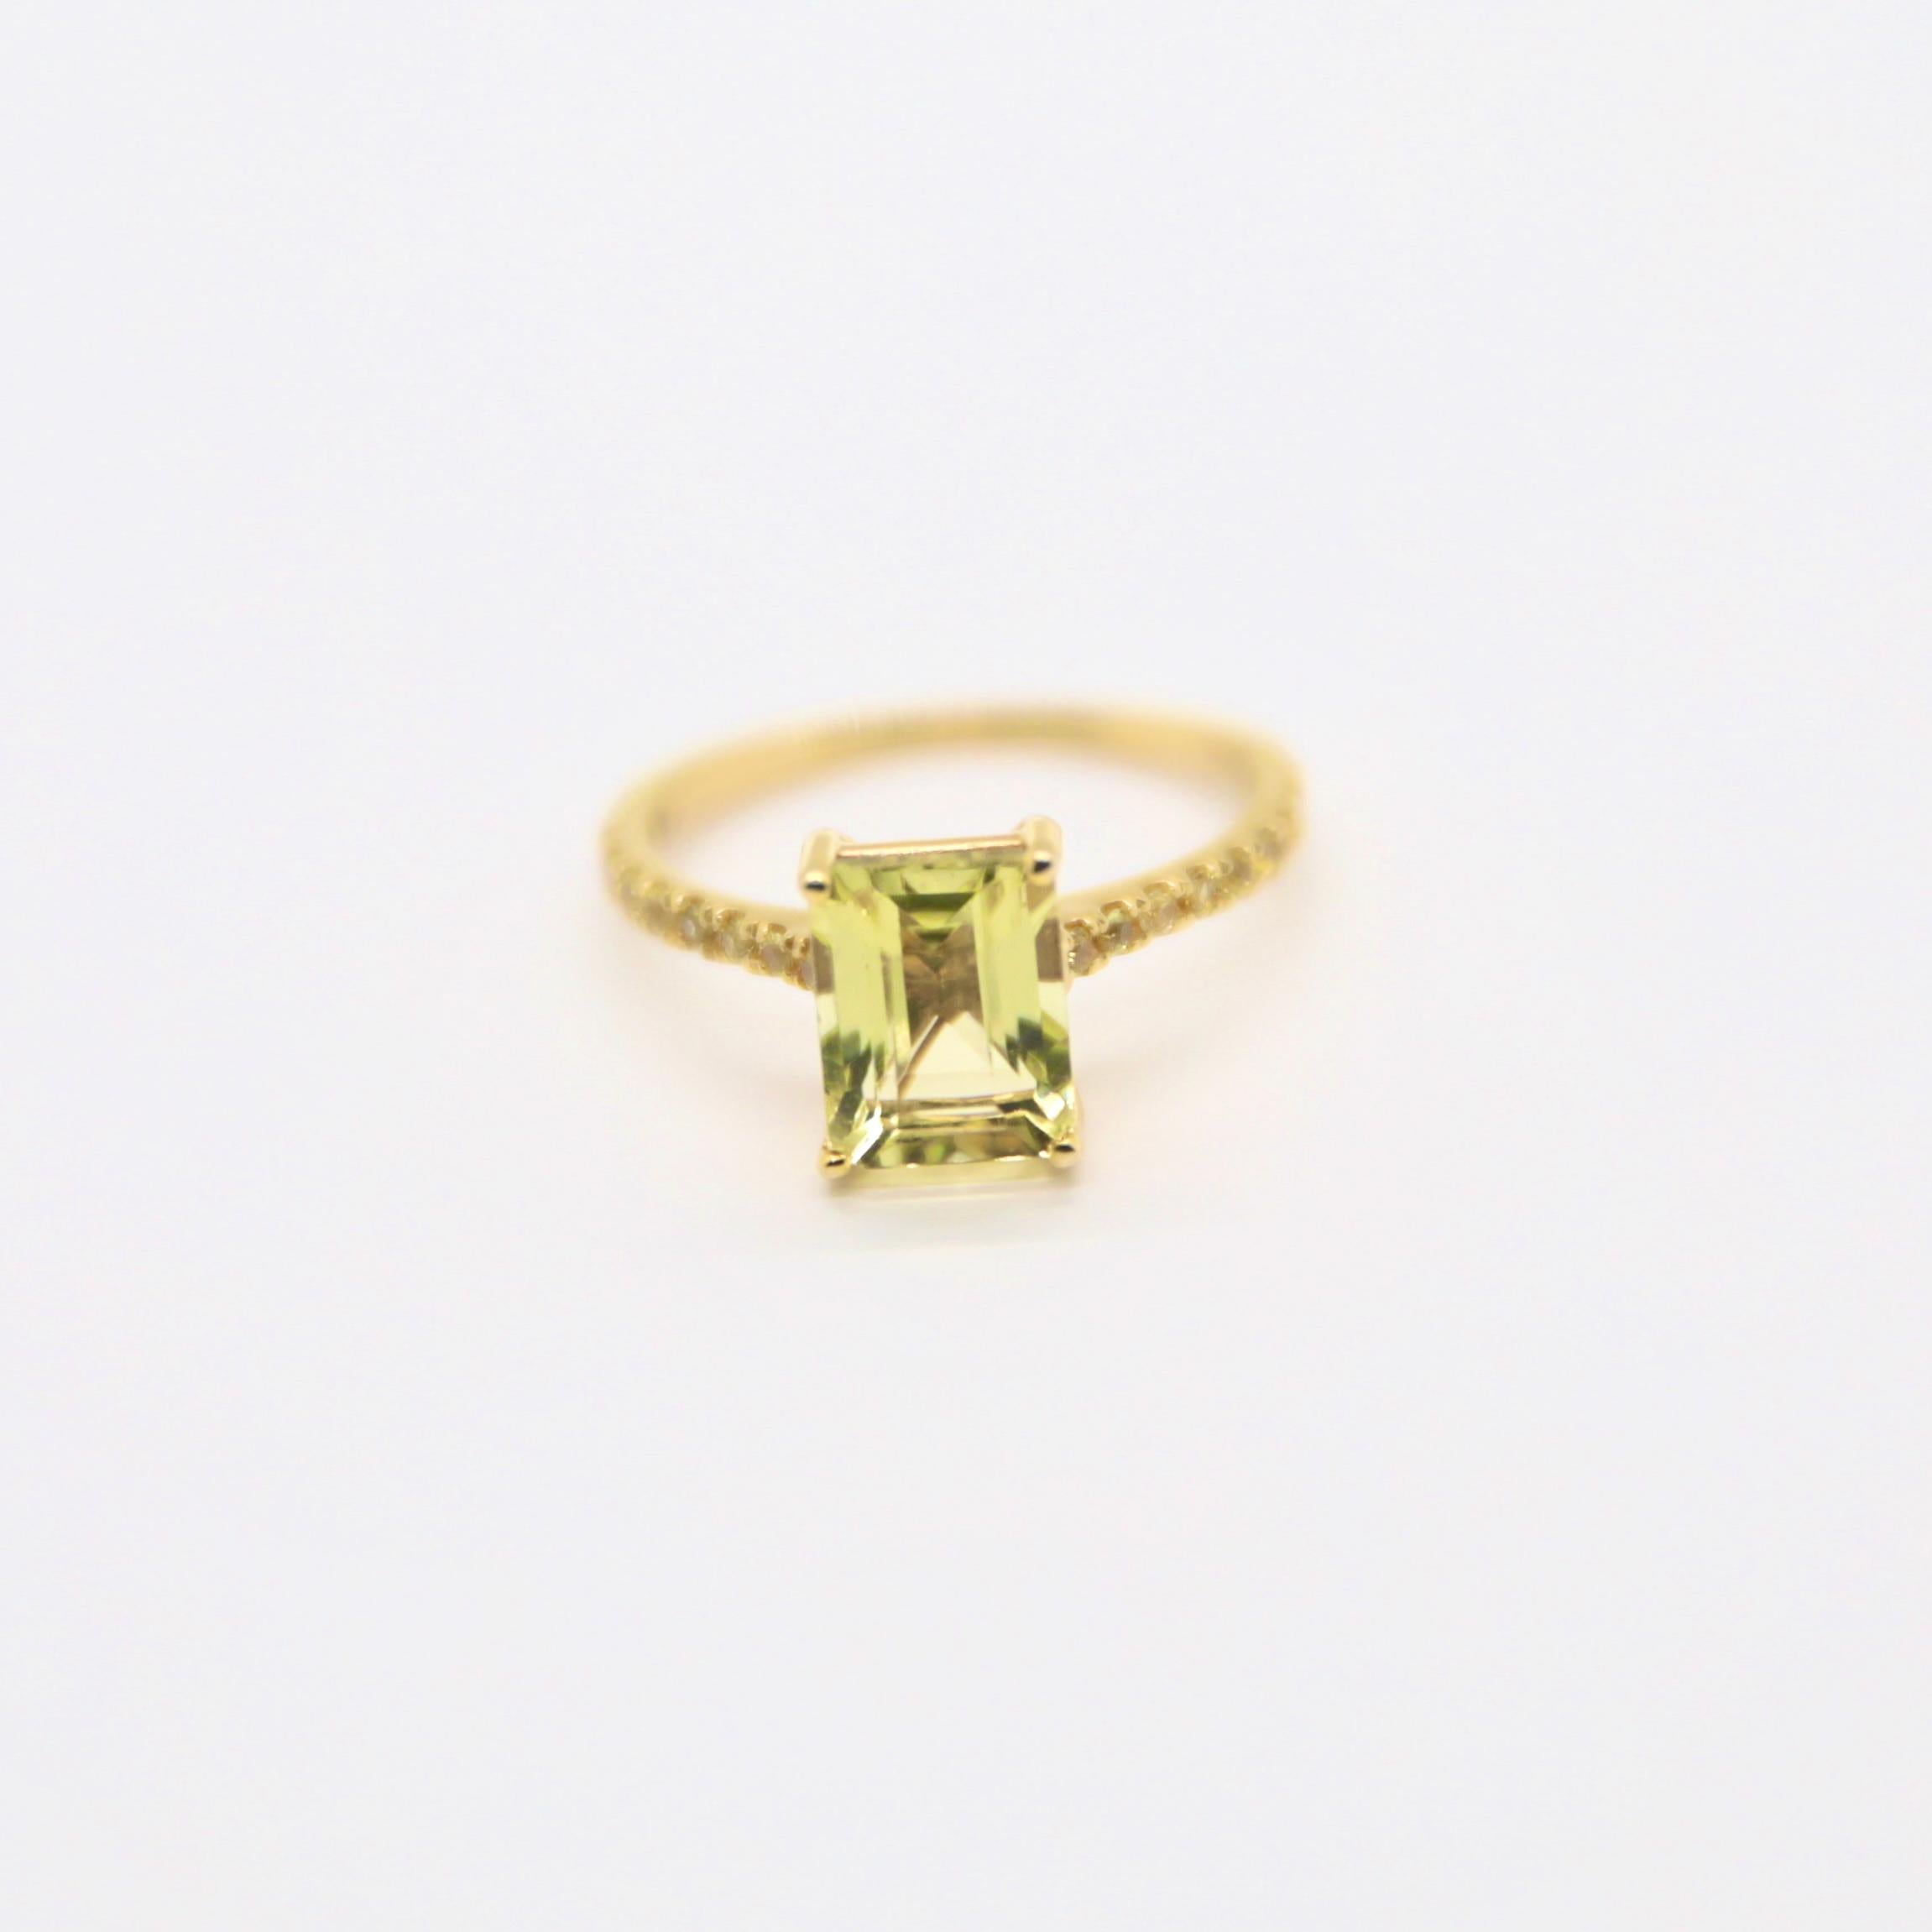 PRODUCT DETAILS

- Emerald cut lemon quartz - 9 X 7 mm,  2.30 carat total weight

- Round Yellow sapphire on the shank : 0.15 ct. t.w

- 14k yellow gold (stamped)

- Almost all gemstones have been treated to enhance their beauty 

- Finger size: 